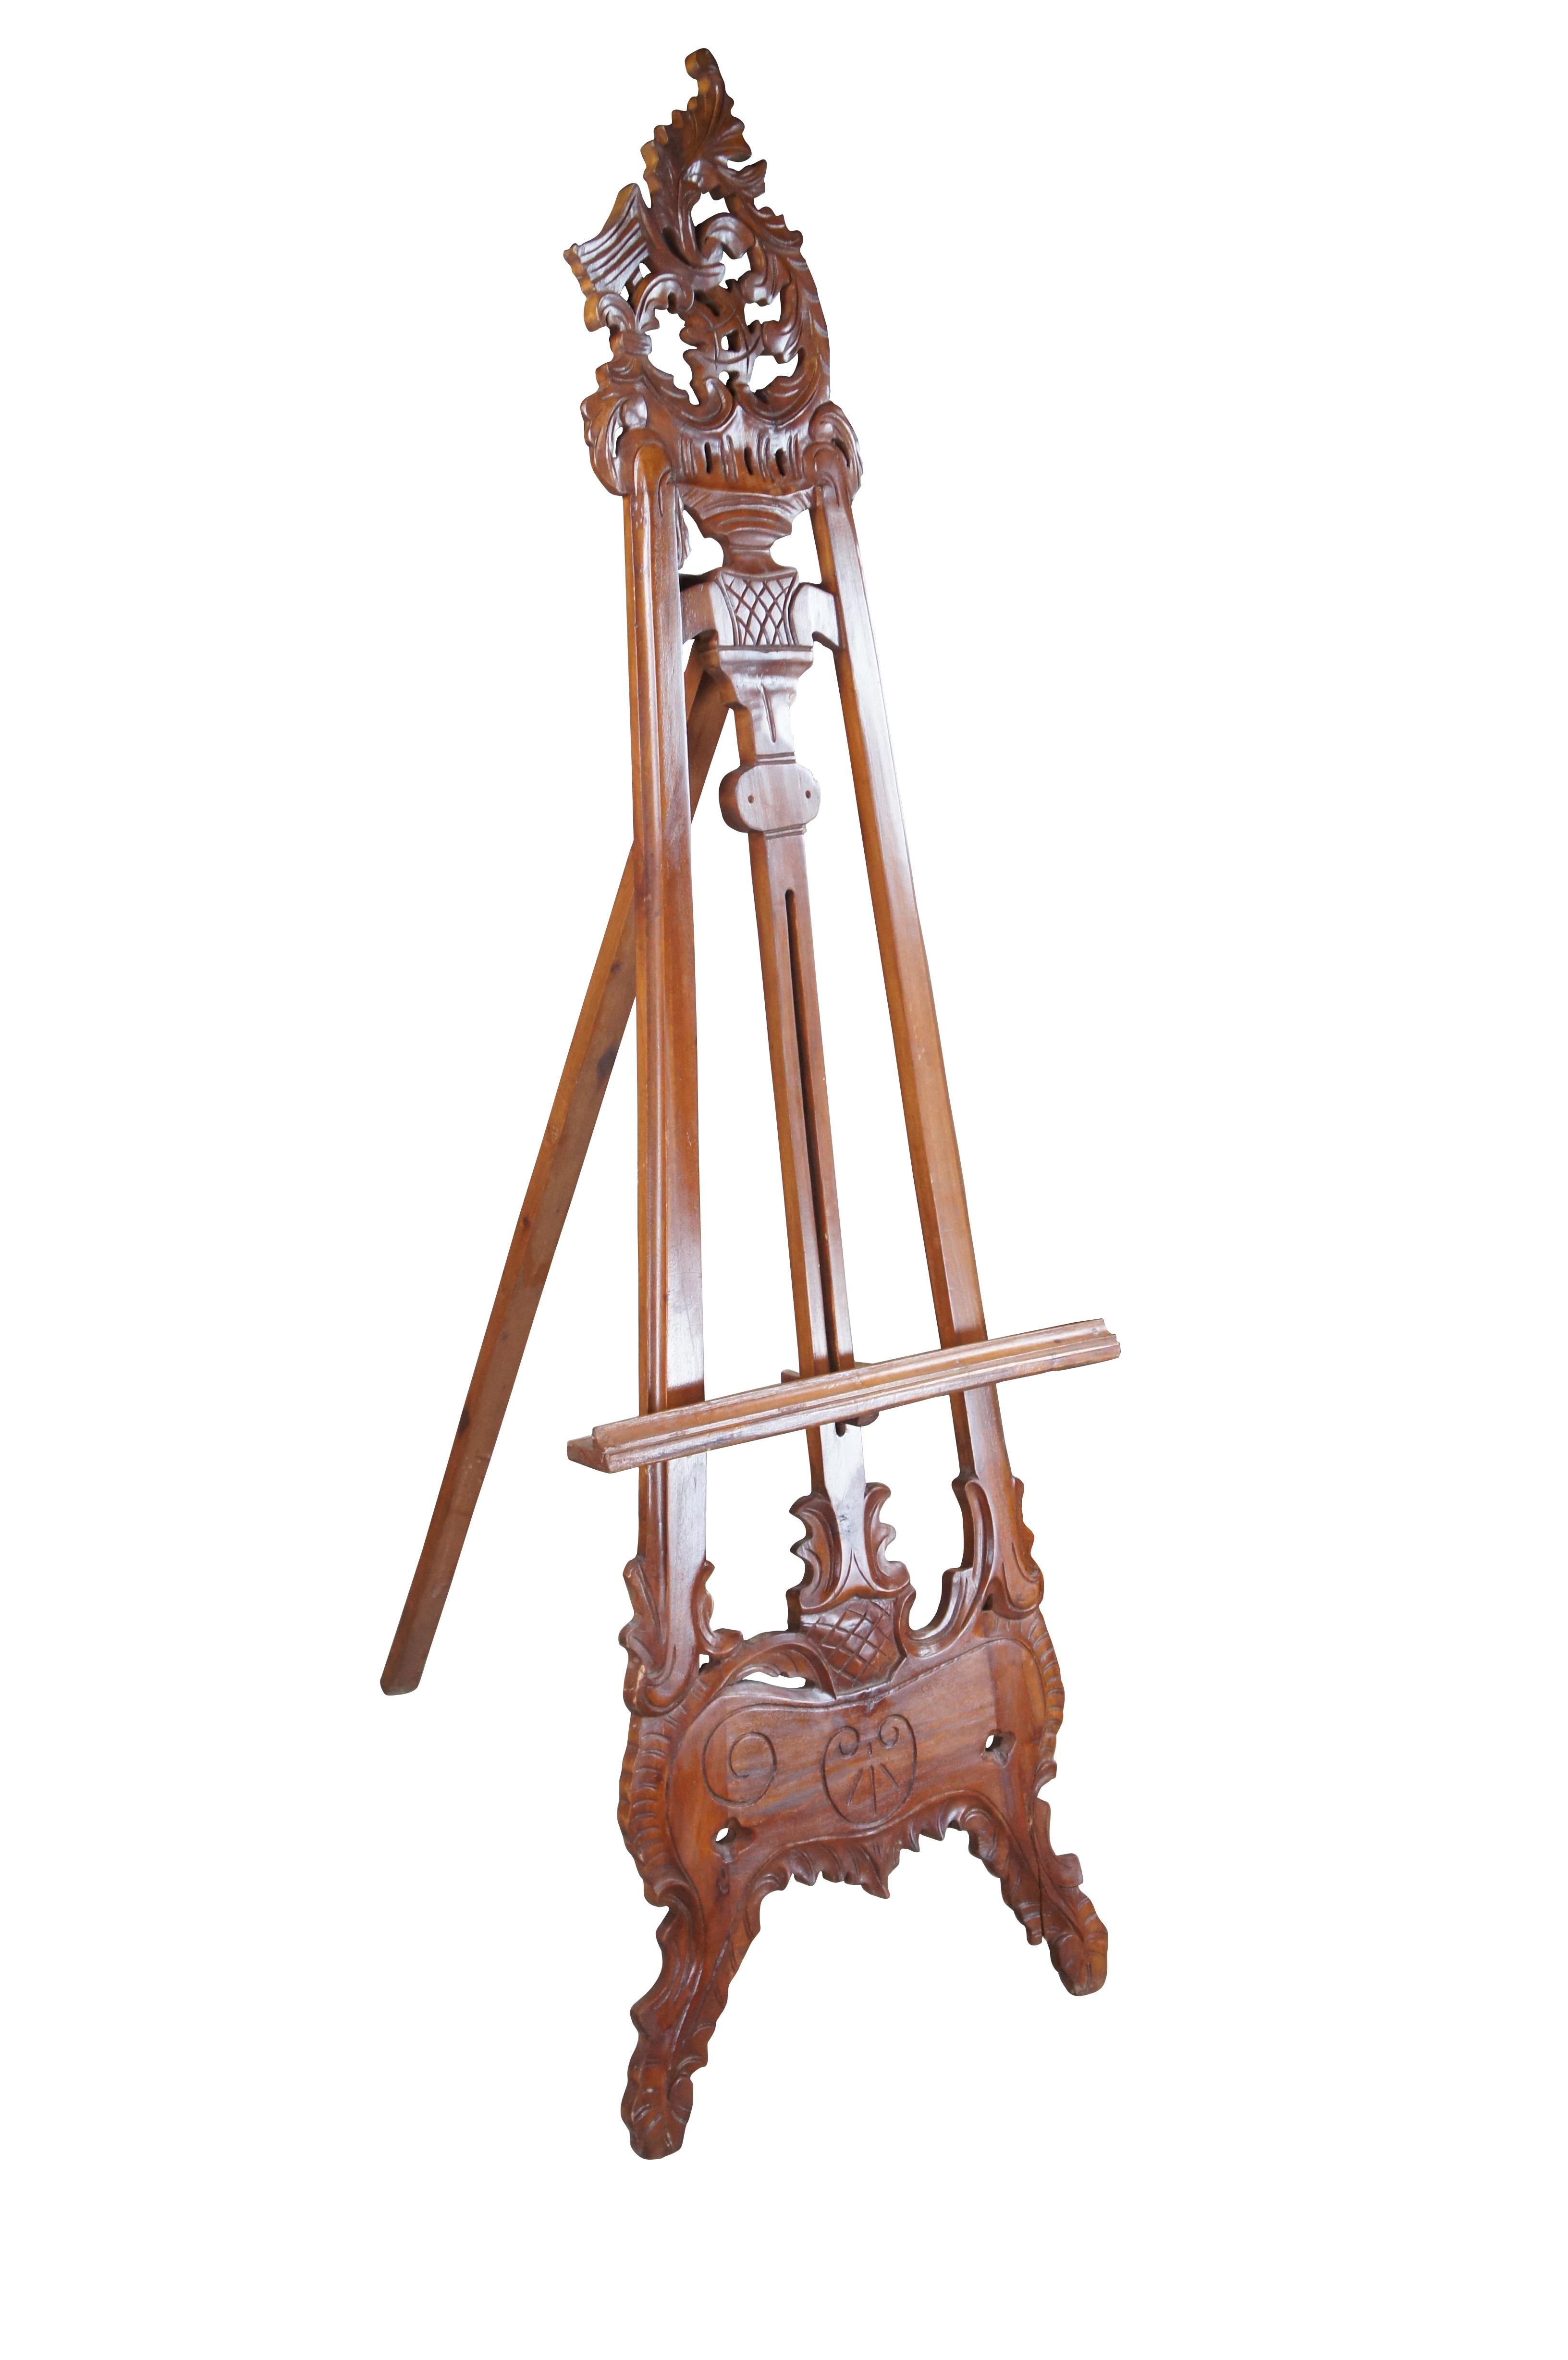 Late 20th Century Baroque inspired easel. Made from mahogany with pierced and carved foliate. Features an adjustable stand for displaying artwork.

Dimensions:
67